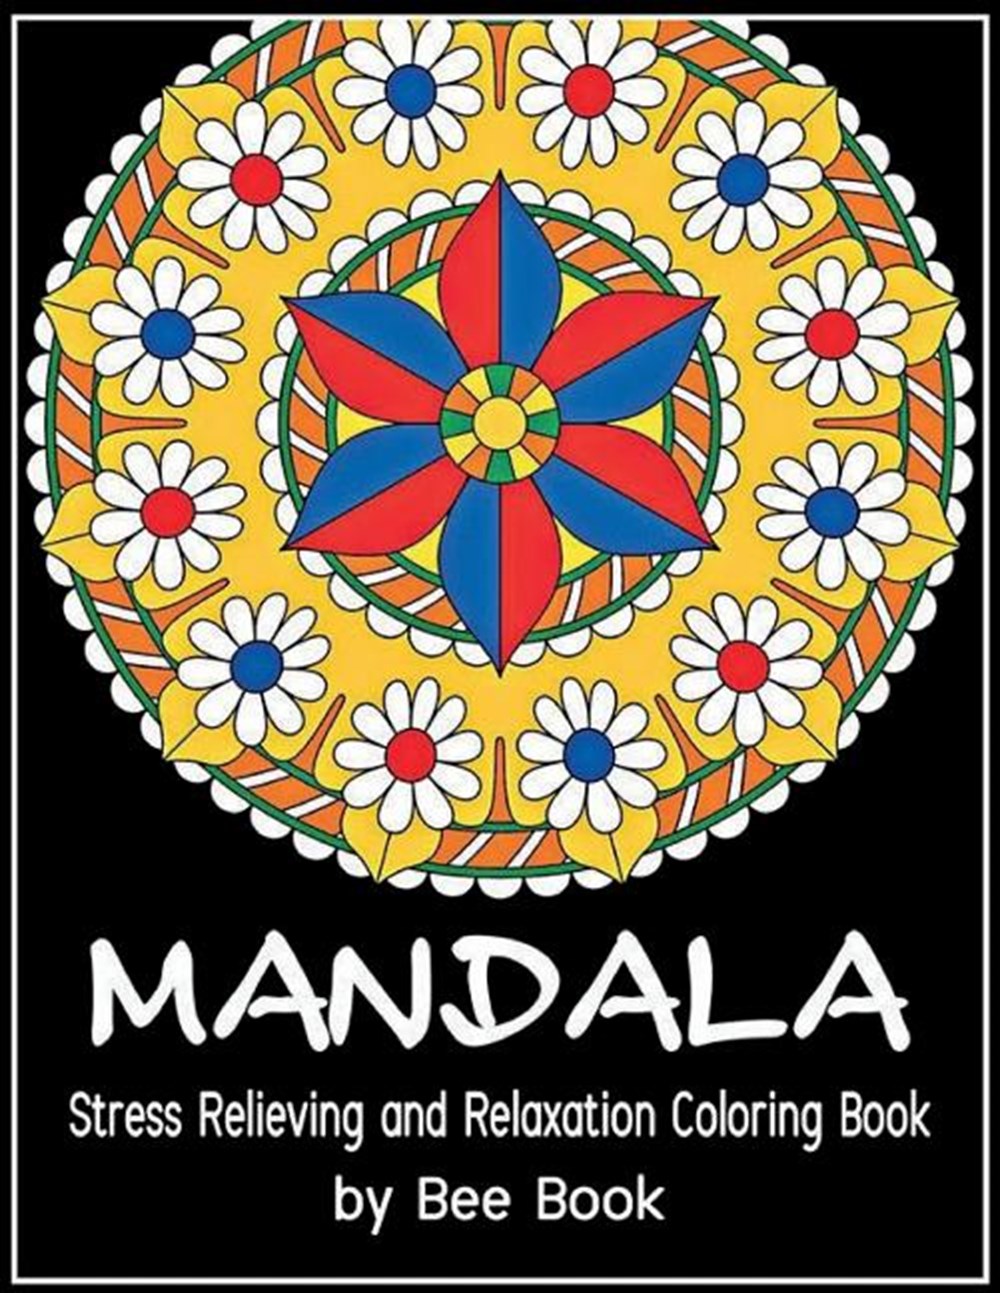 Mandala Stress Relieving and Relaxation Coloring Book By Bee Book: 25 Unique Mandala Designs and Str